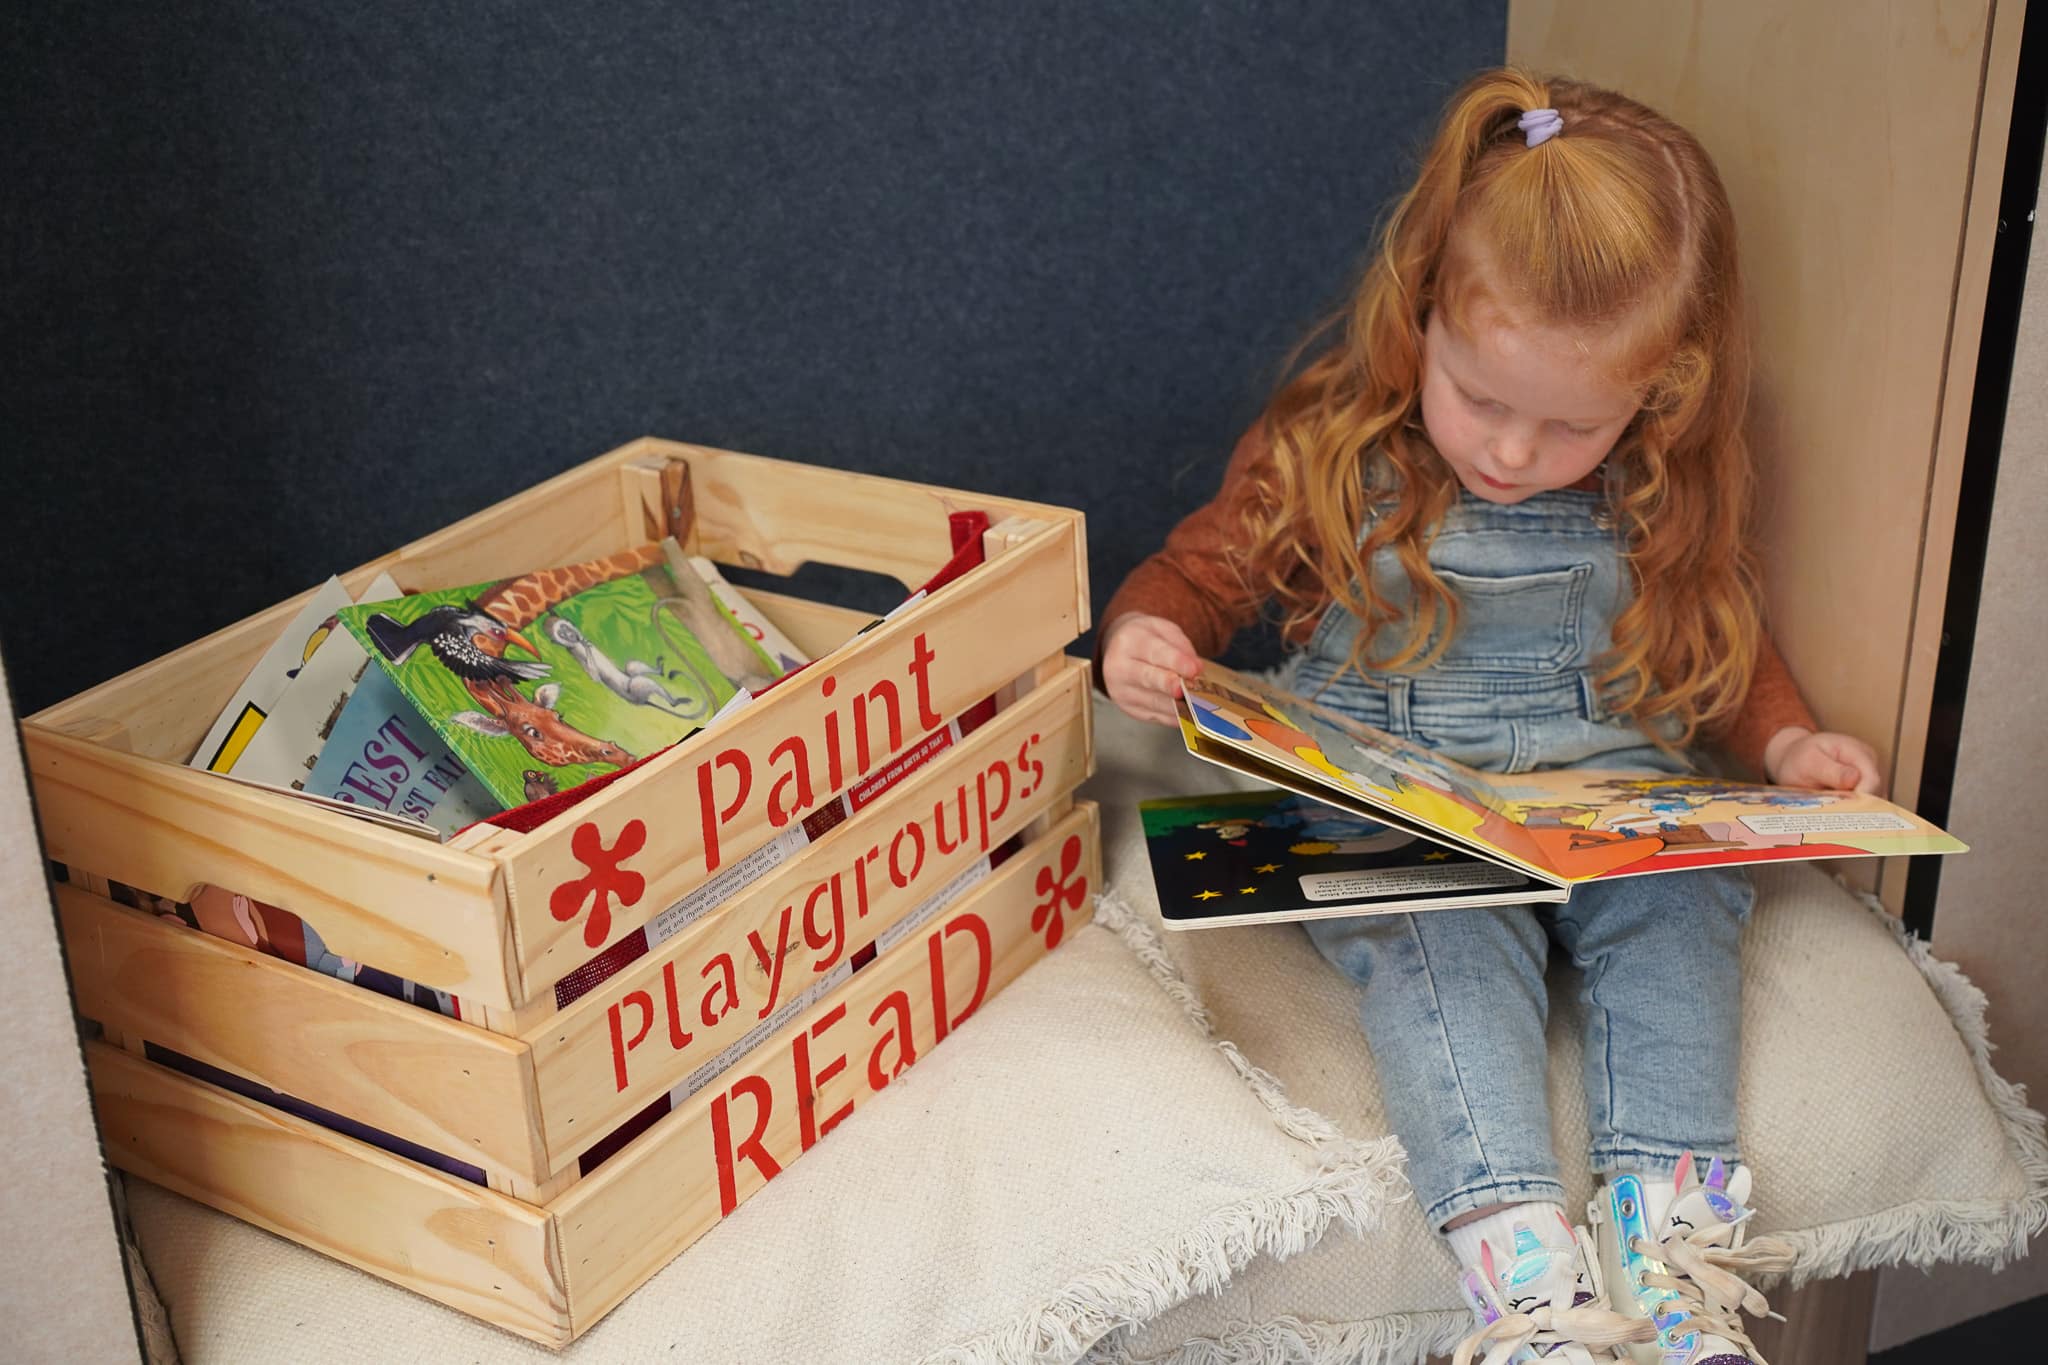 Child reading a book during playgroup activities